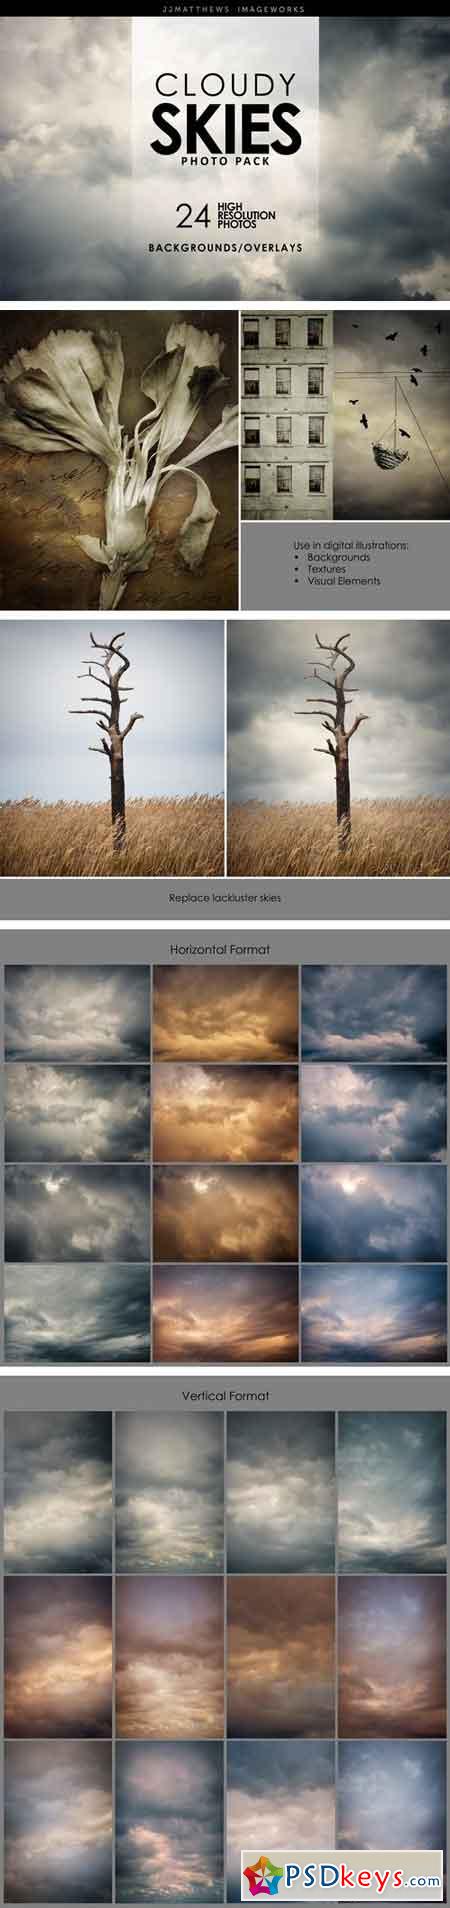 Cloudy Skies-Backgrounds & Overlays 2083980